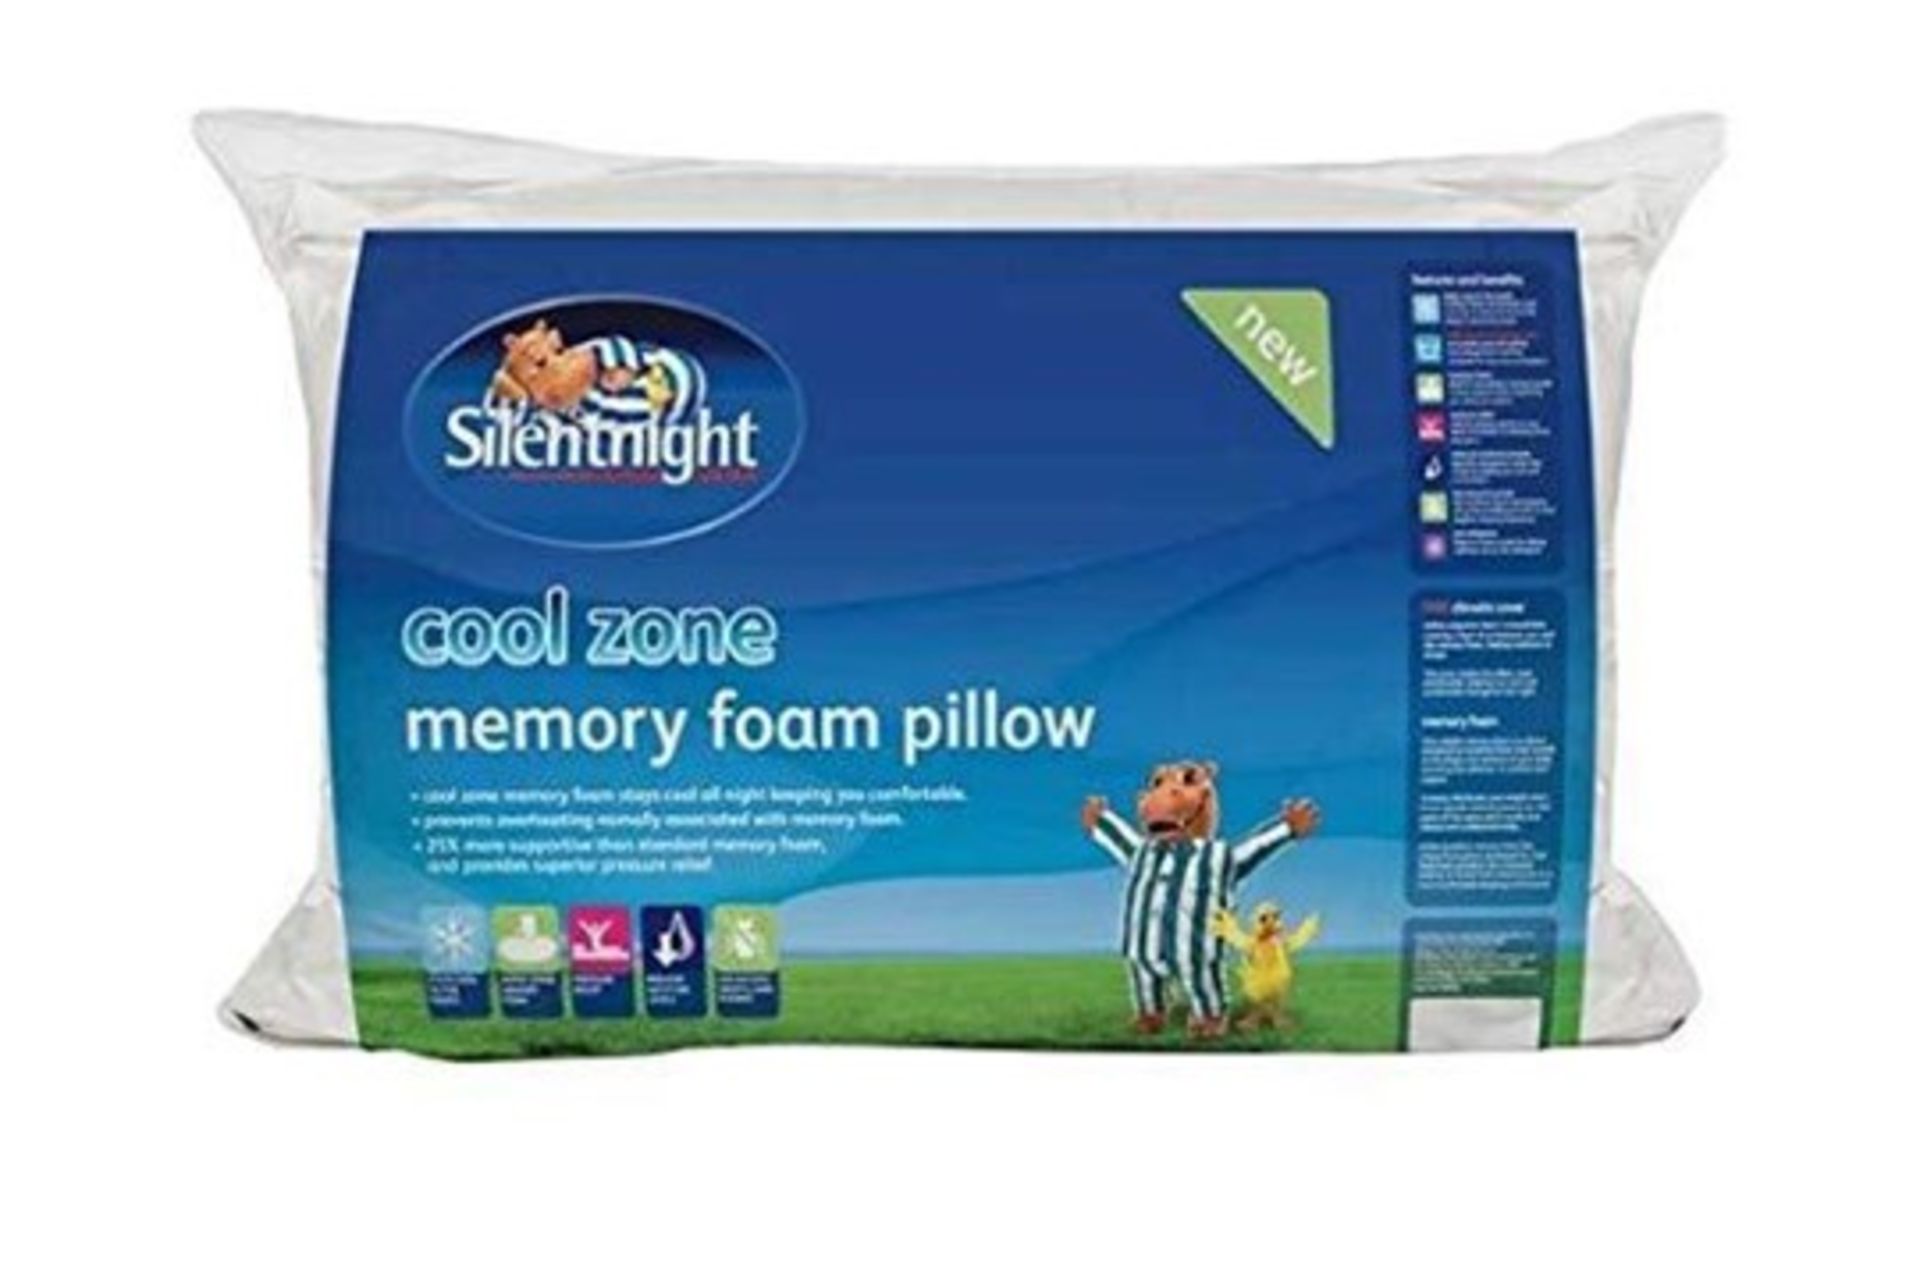 Silentnight Cool Zone memory foam pillow, brand new and packaged. RRP £14.99